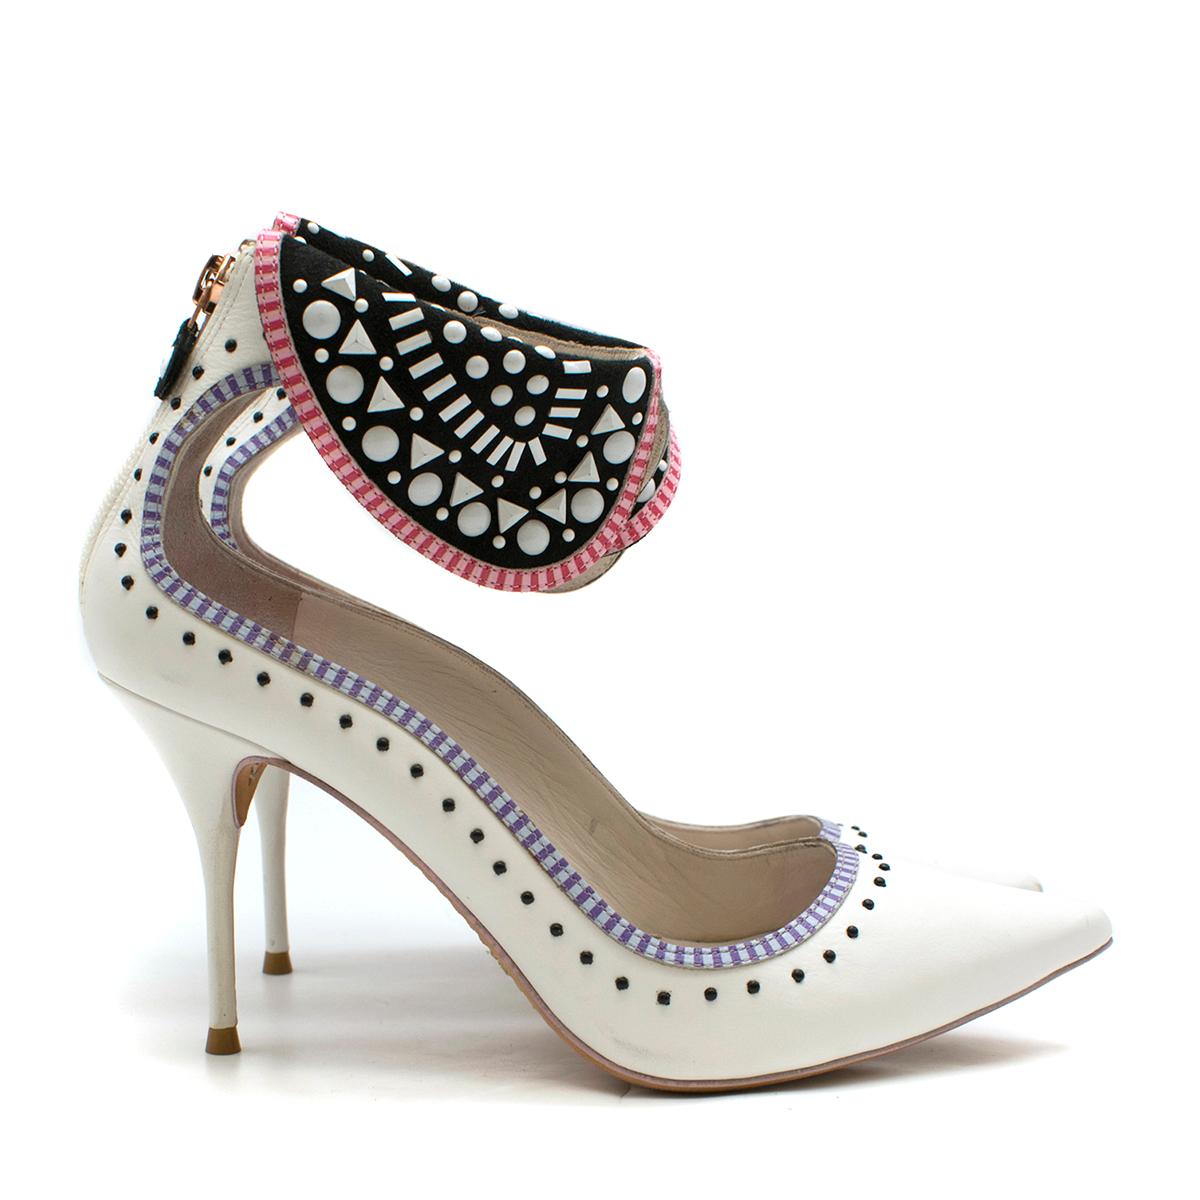 Sophia Webster White Leather Studs Embellished Collar Pumps

- White leather pumps
- Stiletto heel
- Purple and blue trim embellished with black crystals
- Embellished with black studded suede collar with pink trim 

This item comes with the